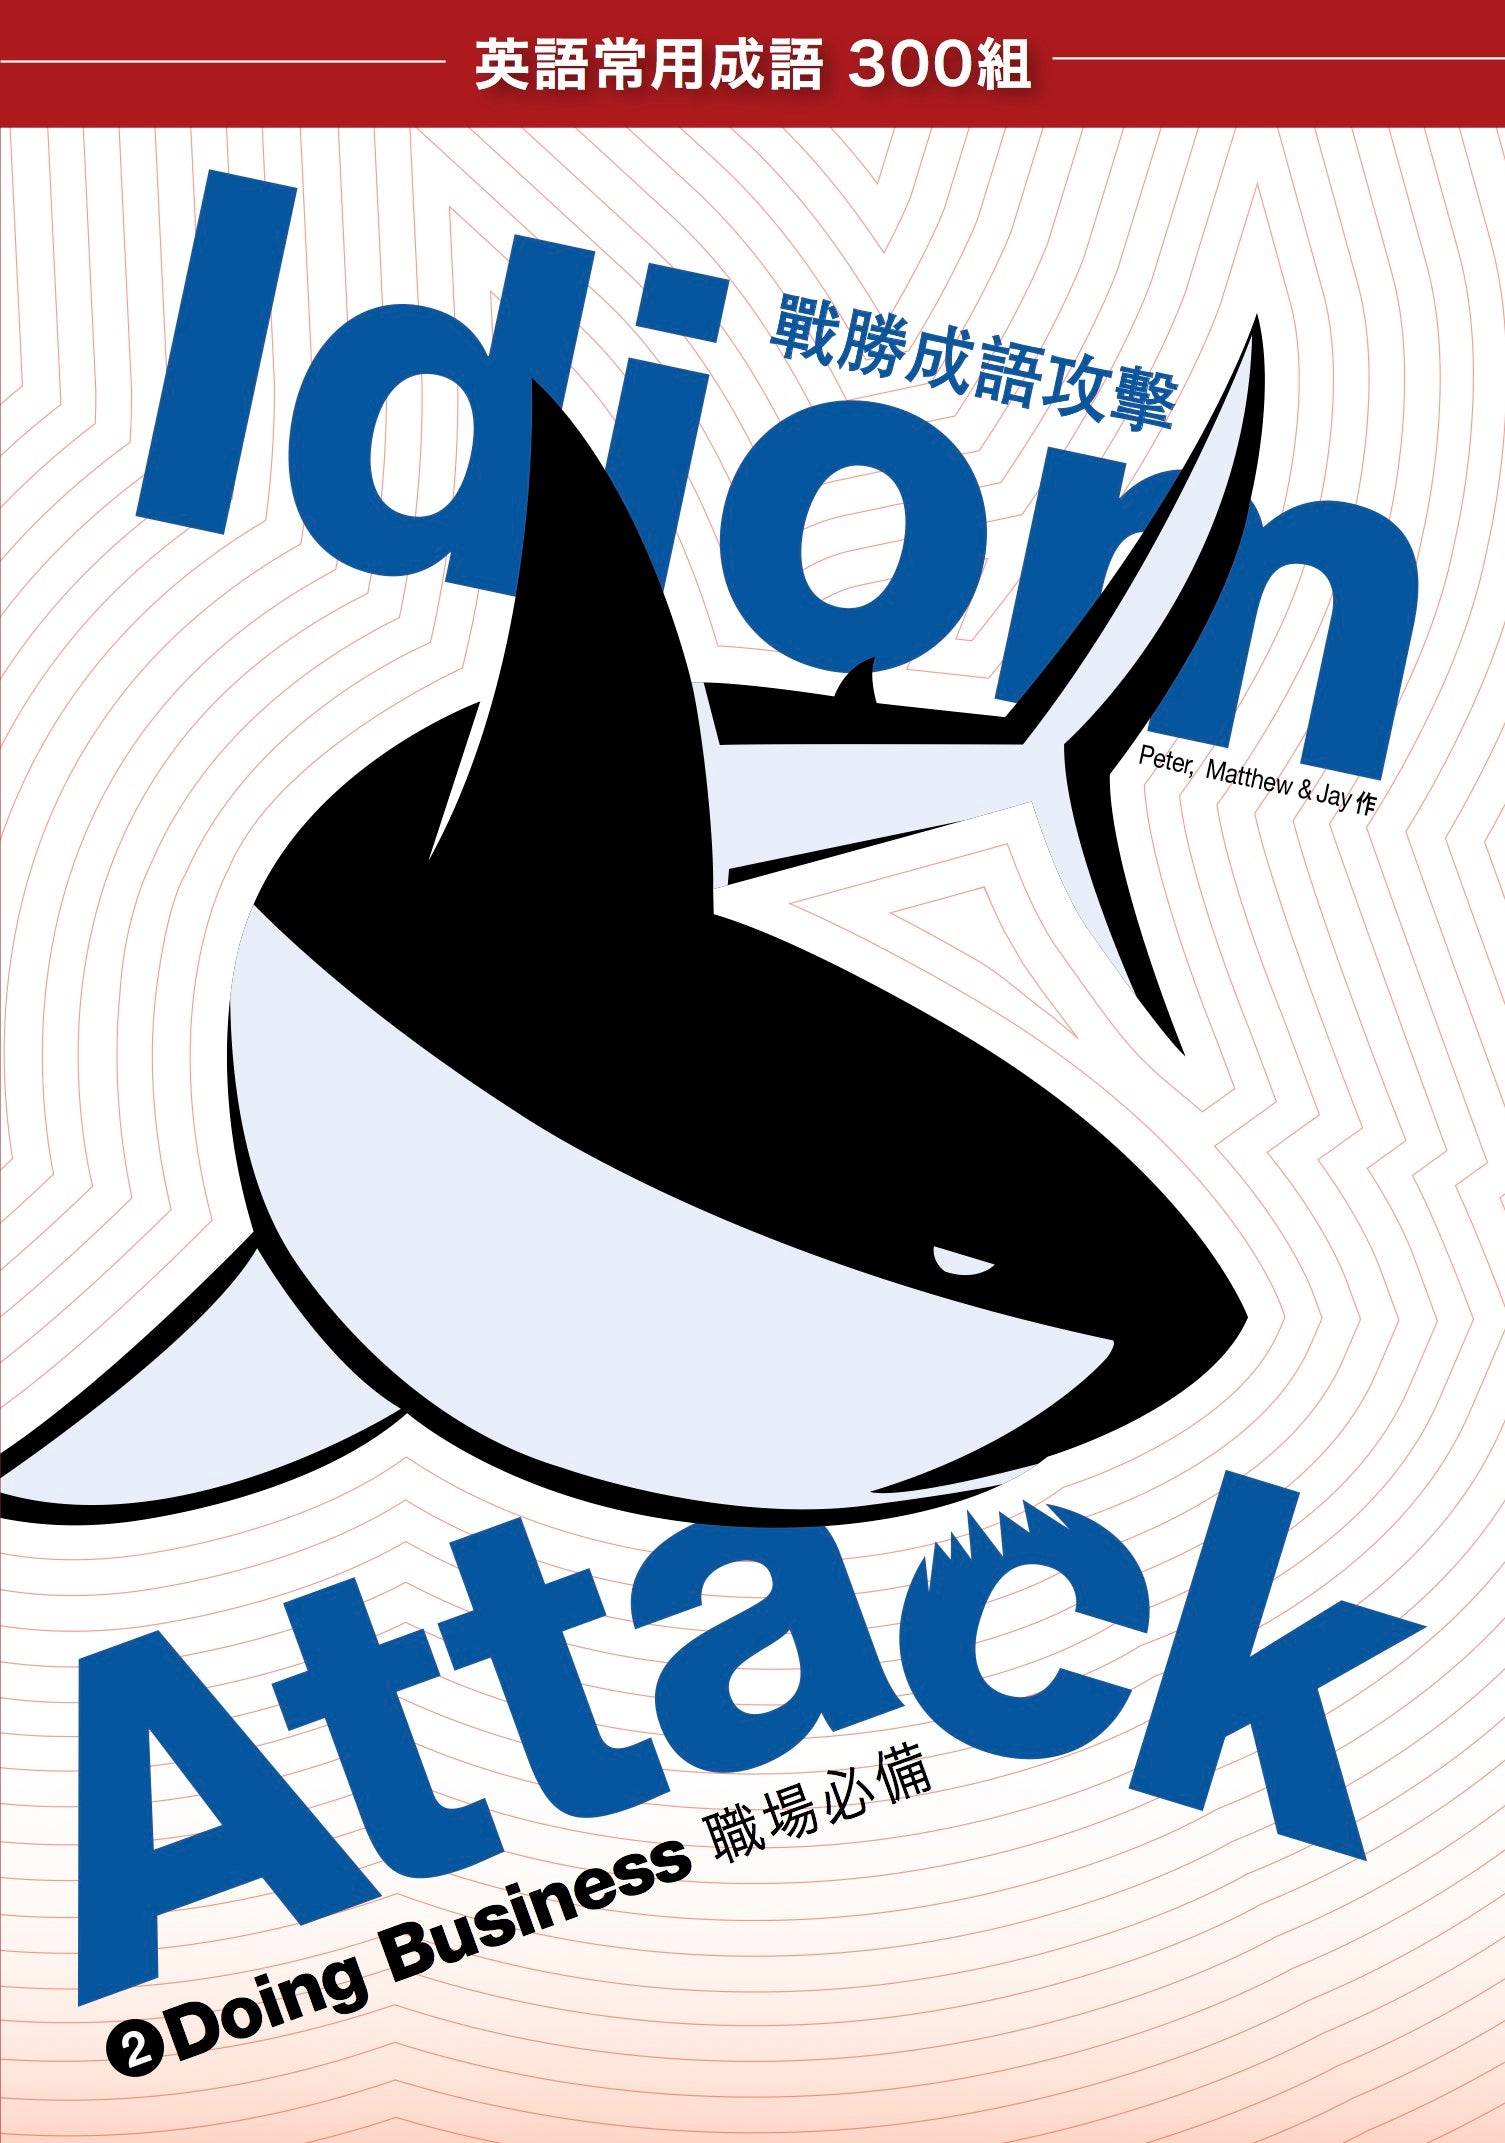 Idiom Attack Vol. 2 - Doing Business (Trad. Chinese Edition): 成語攻擊  2 - 職場必備 : English Idioms for ESL Learners: With 300+ Idioms in 25 Themed Chapters w/ free MP3 at IdiomAttack.com